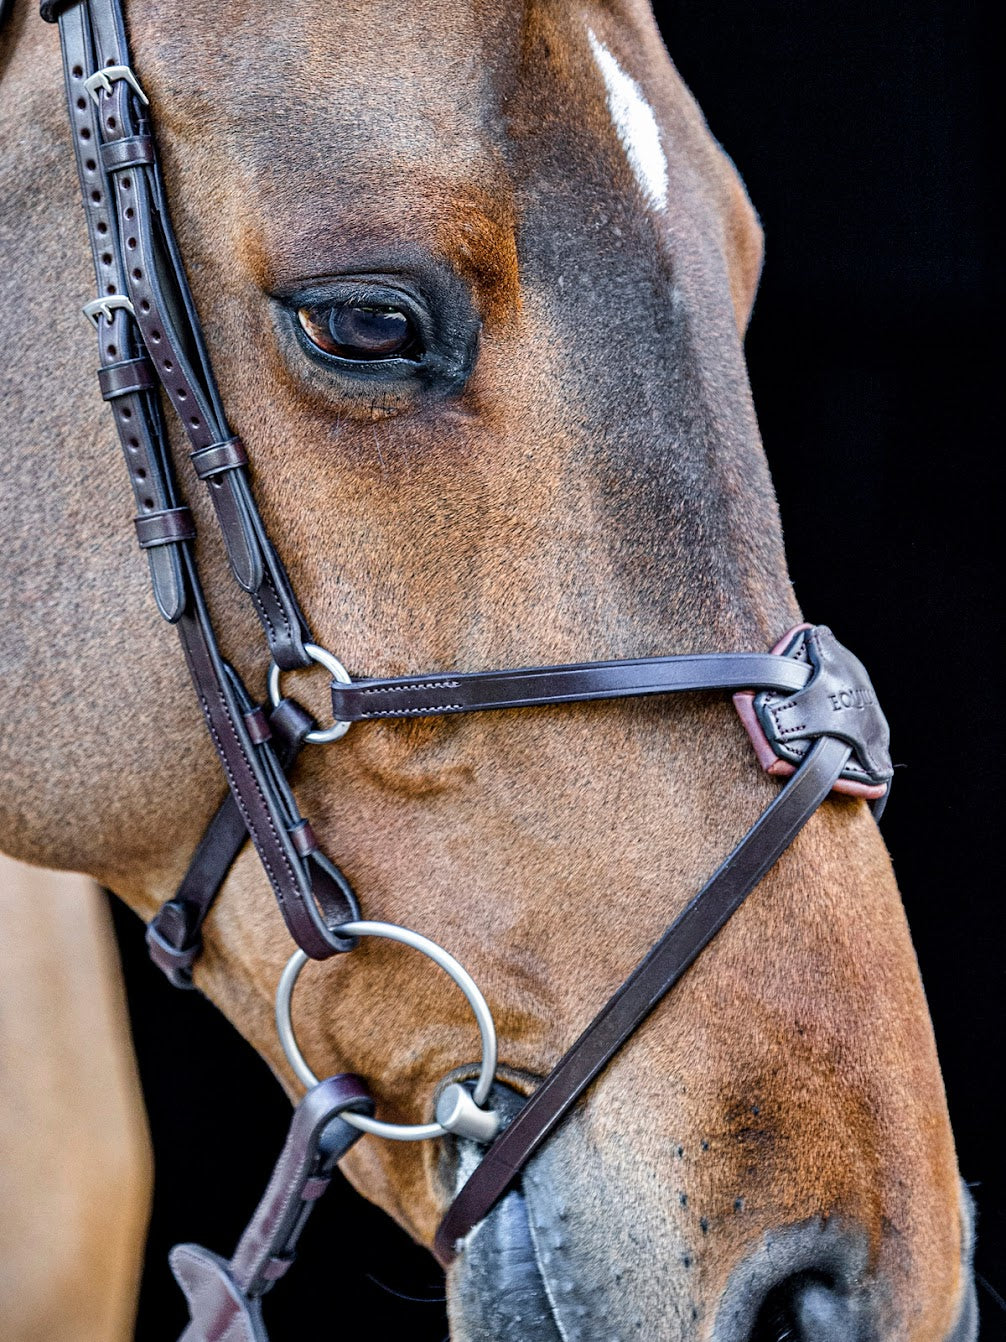 The Equiline Mexican noseband is the perfect grackle for your horse. Made in stunning soft Italian leather and finished with padding over the nose to offer comfort for your horse. 